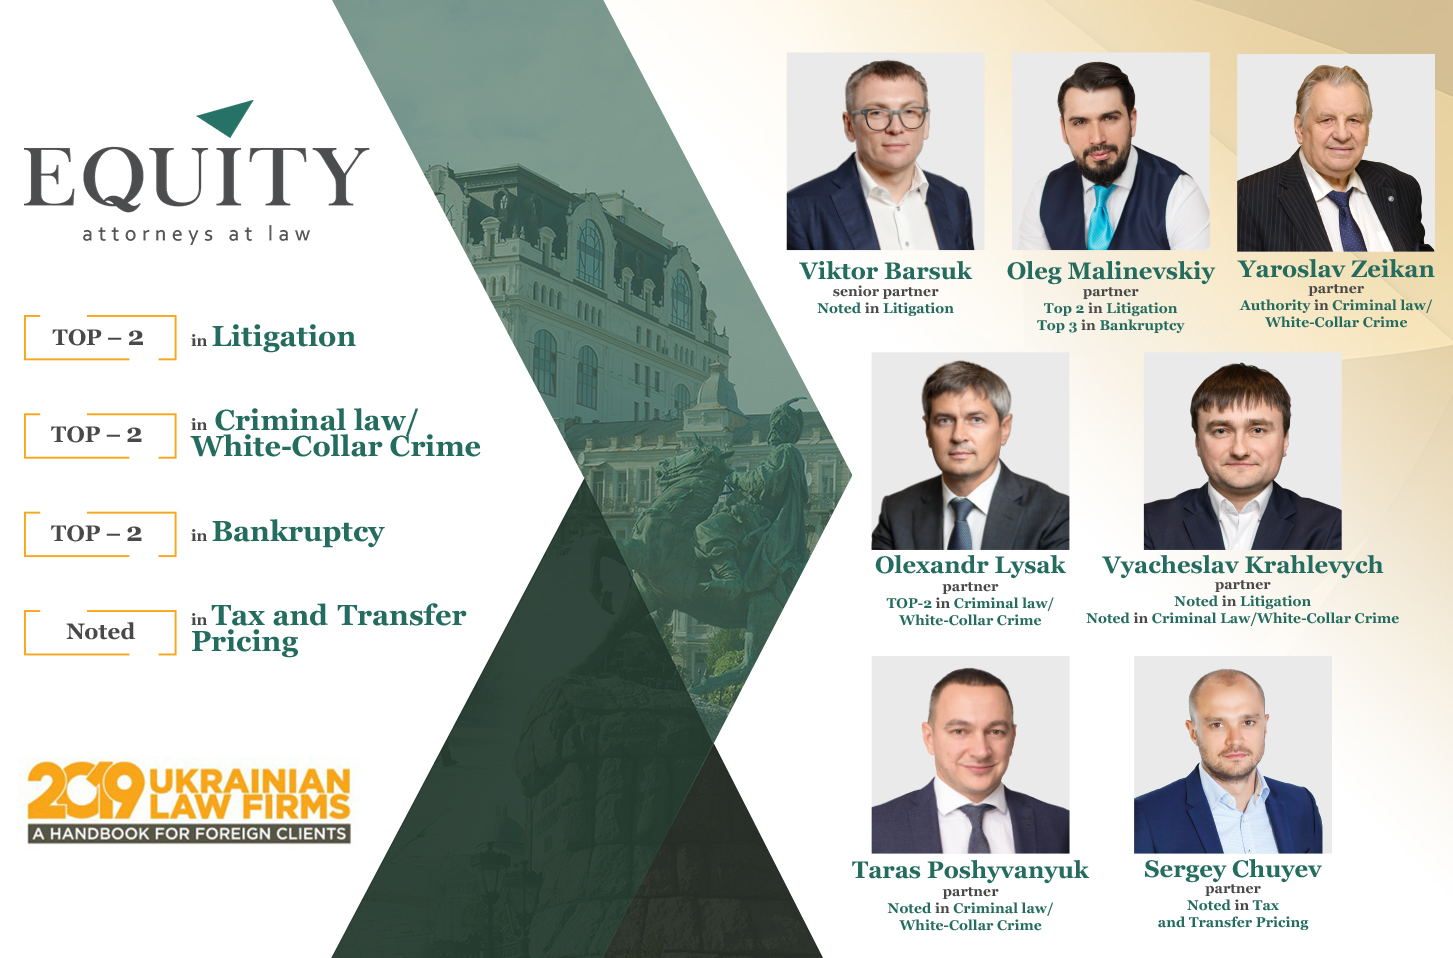 The Results of the Annual Ukrainian Law Firms 2019 Research are Published!